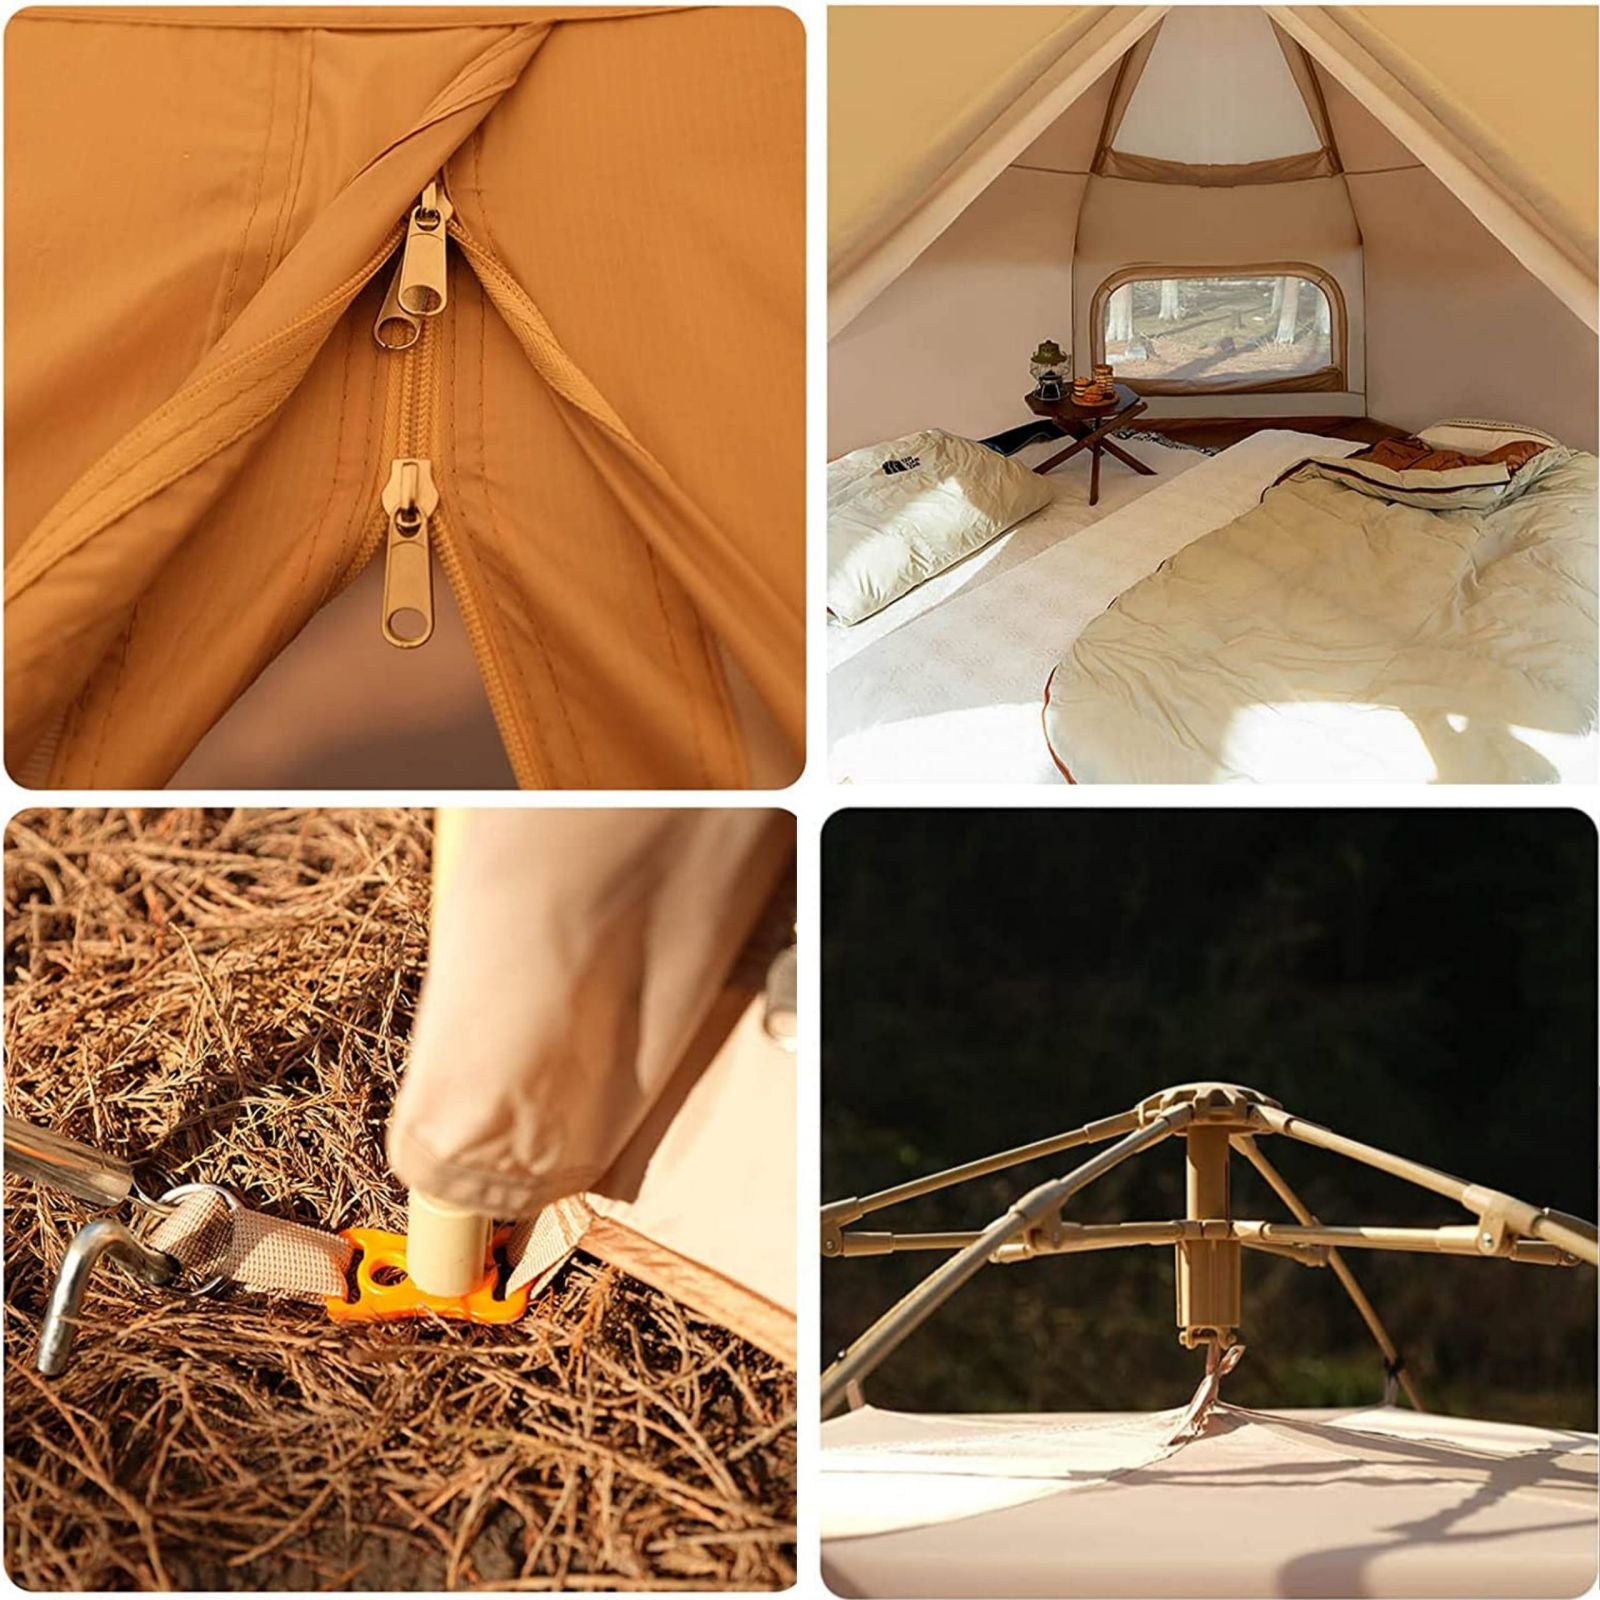 Large Space Luxury Frog Hexagonal Tent 5-8 Person Double Layer All Weather Easy Setup Tents